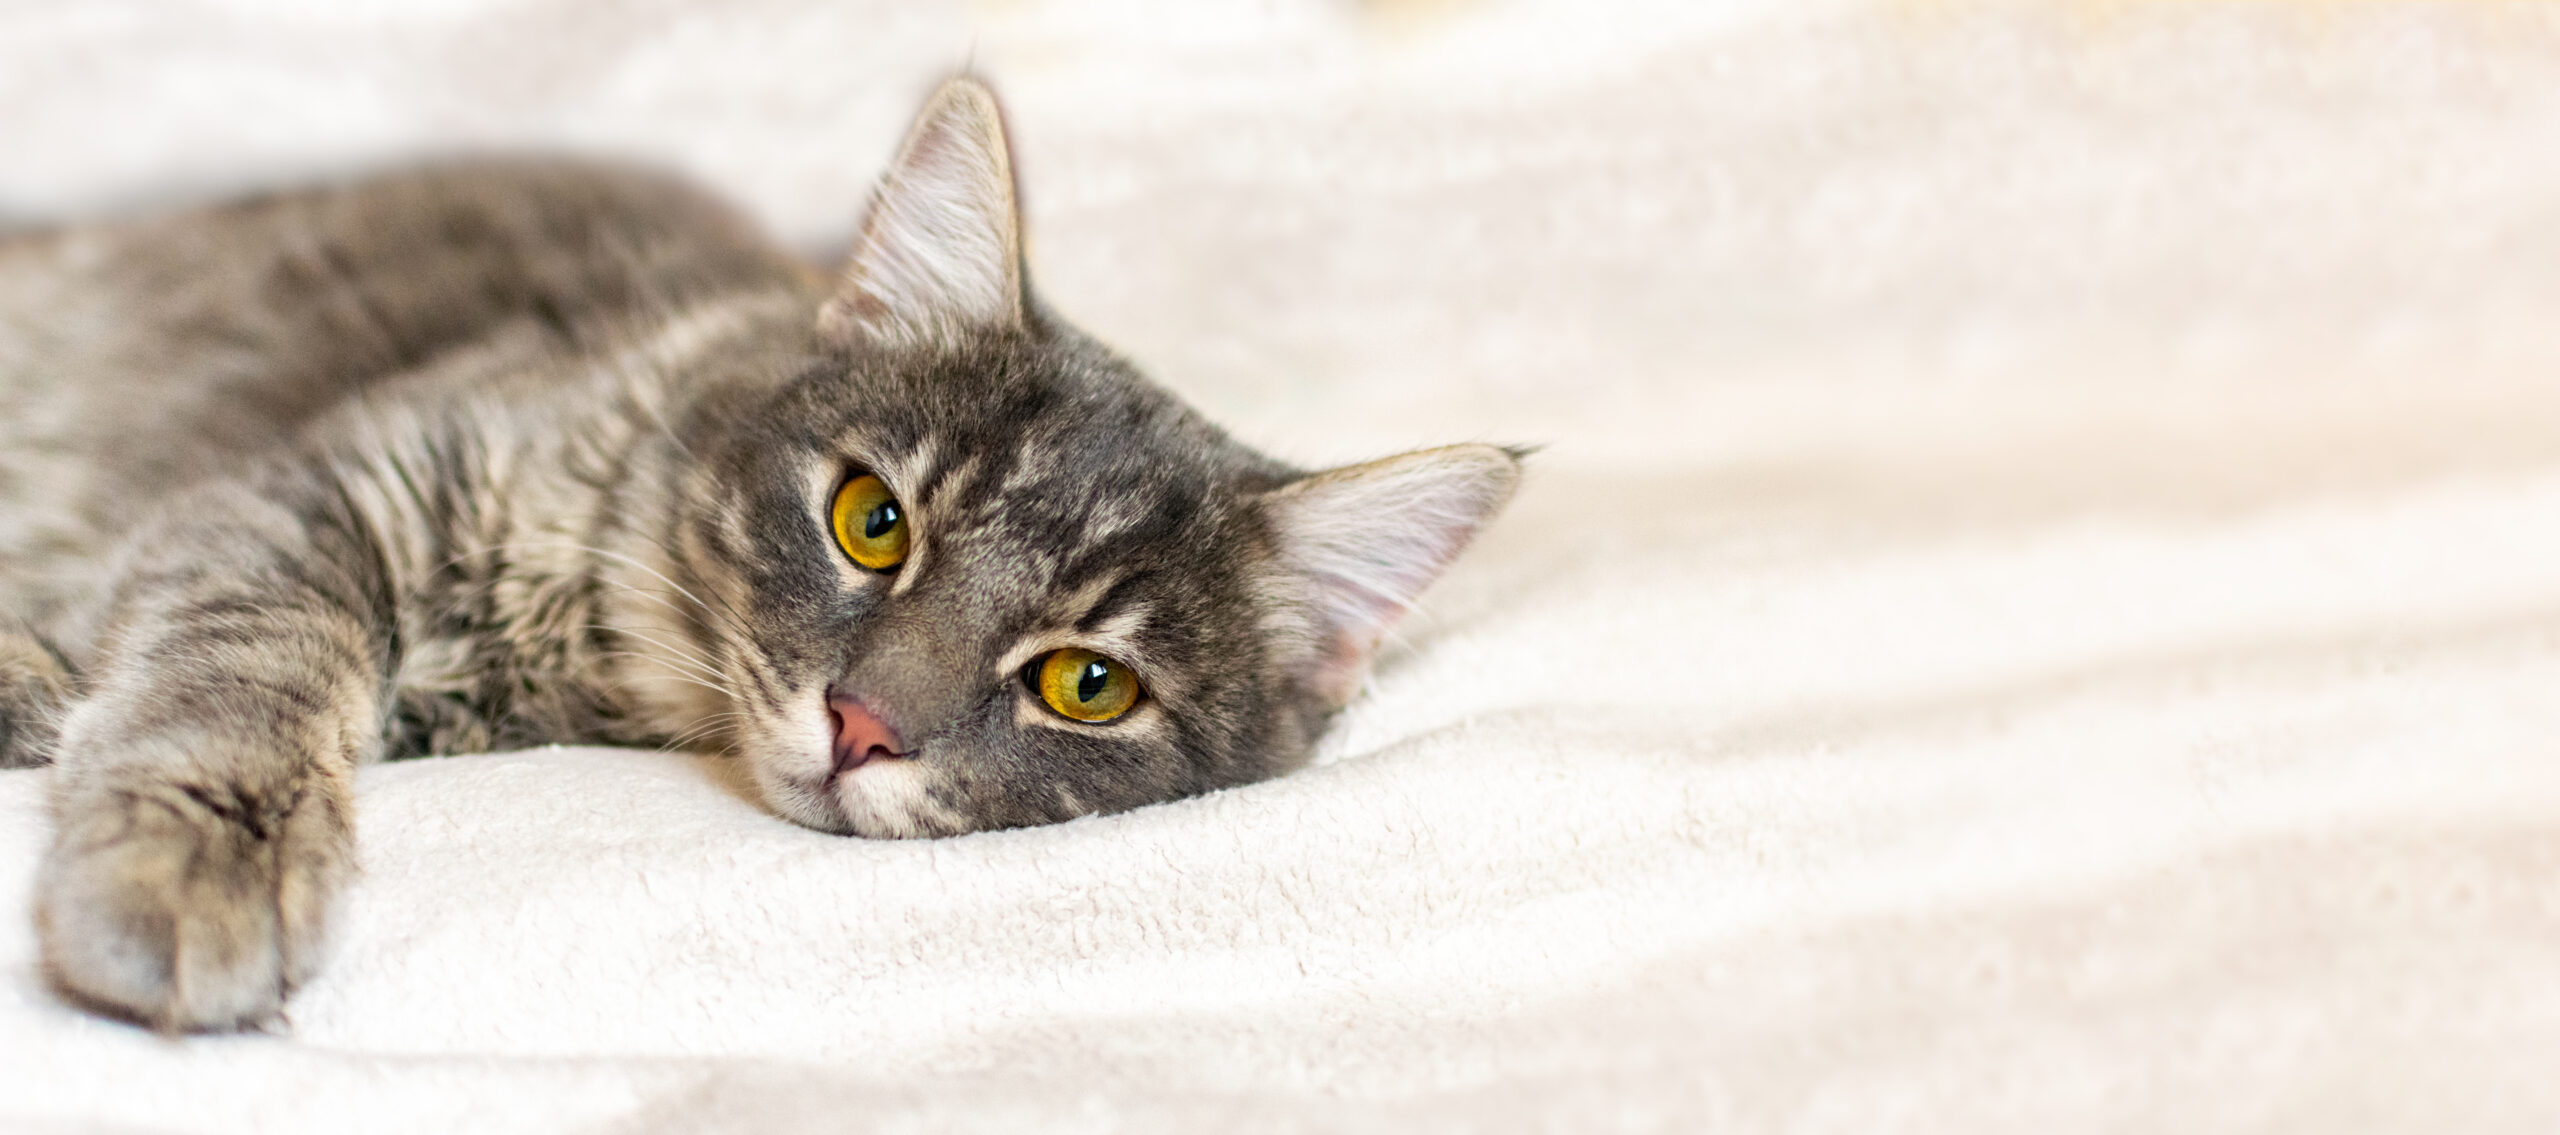 Sad sick young gray cat lies on a white fluffy blanket in a veterinary clinic for pets. Depressed illness animal looks at the camera. Feline health background with copy space.